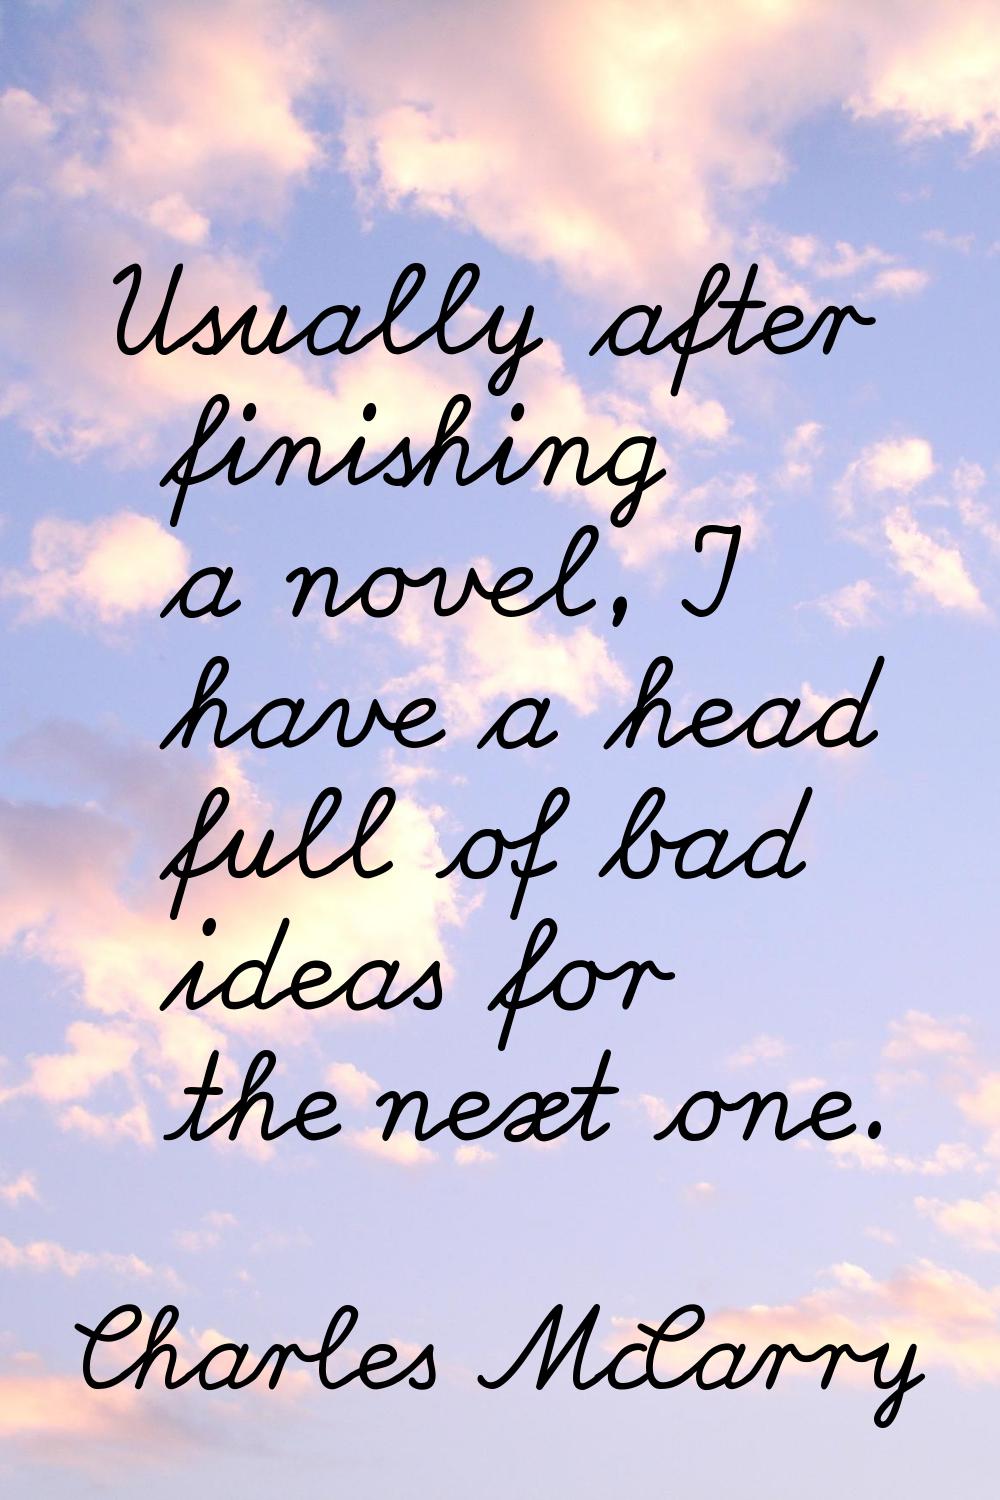 Usually after finishing a novel, I have a head full of bad ideas for the next one.